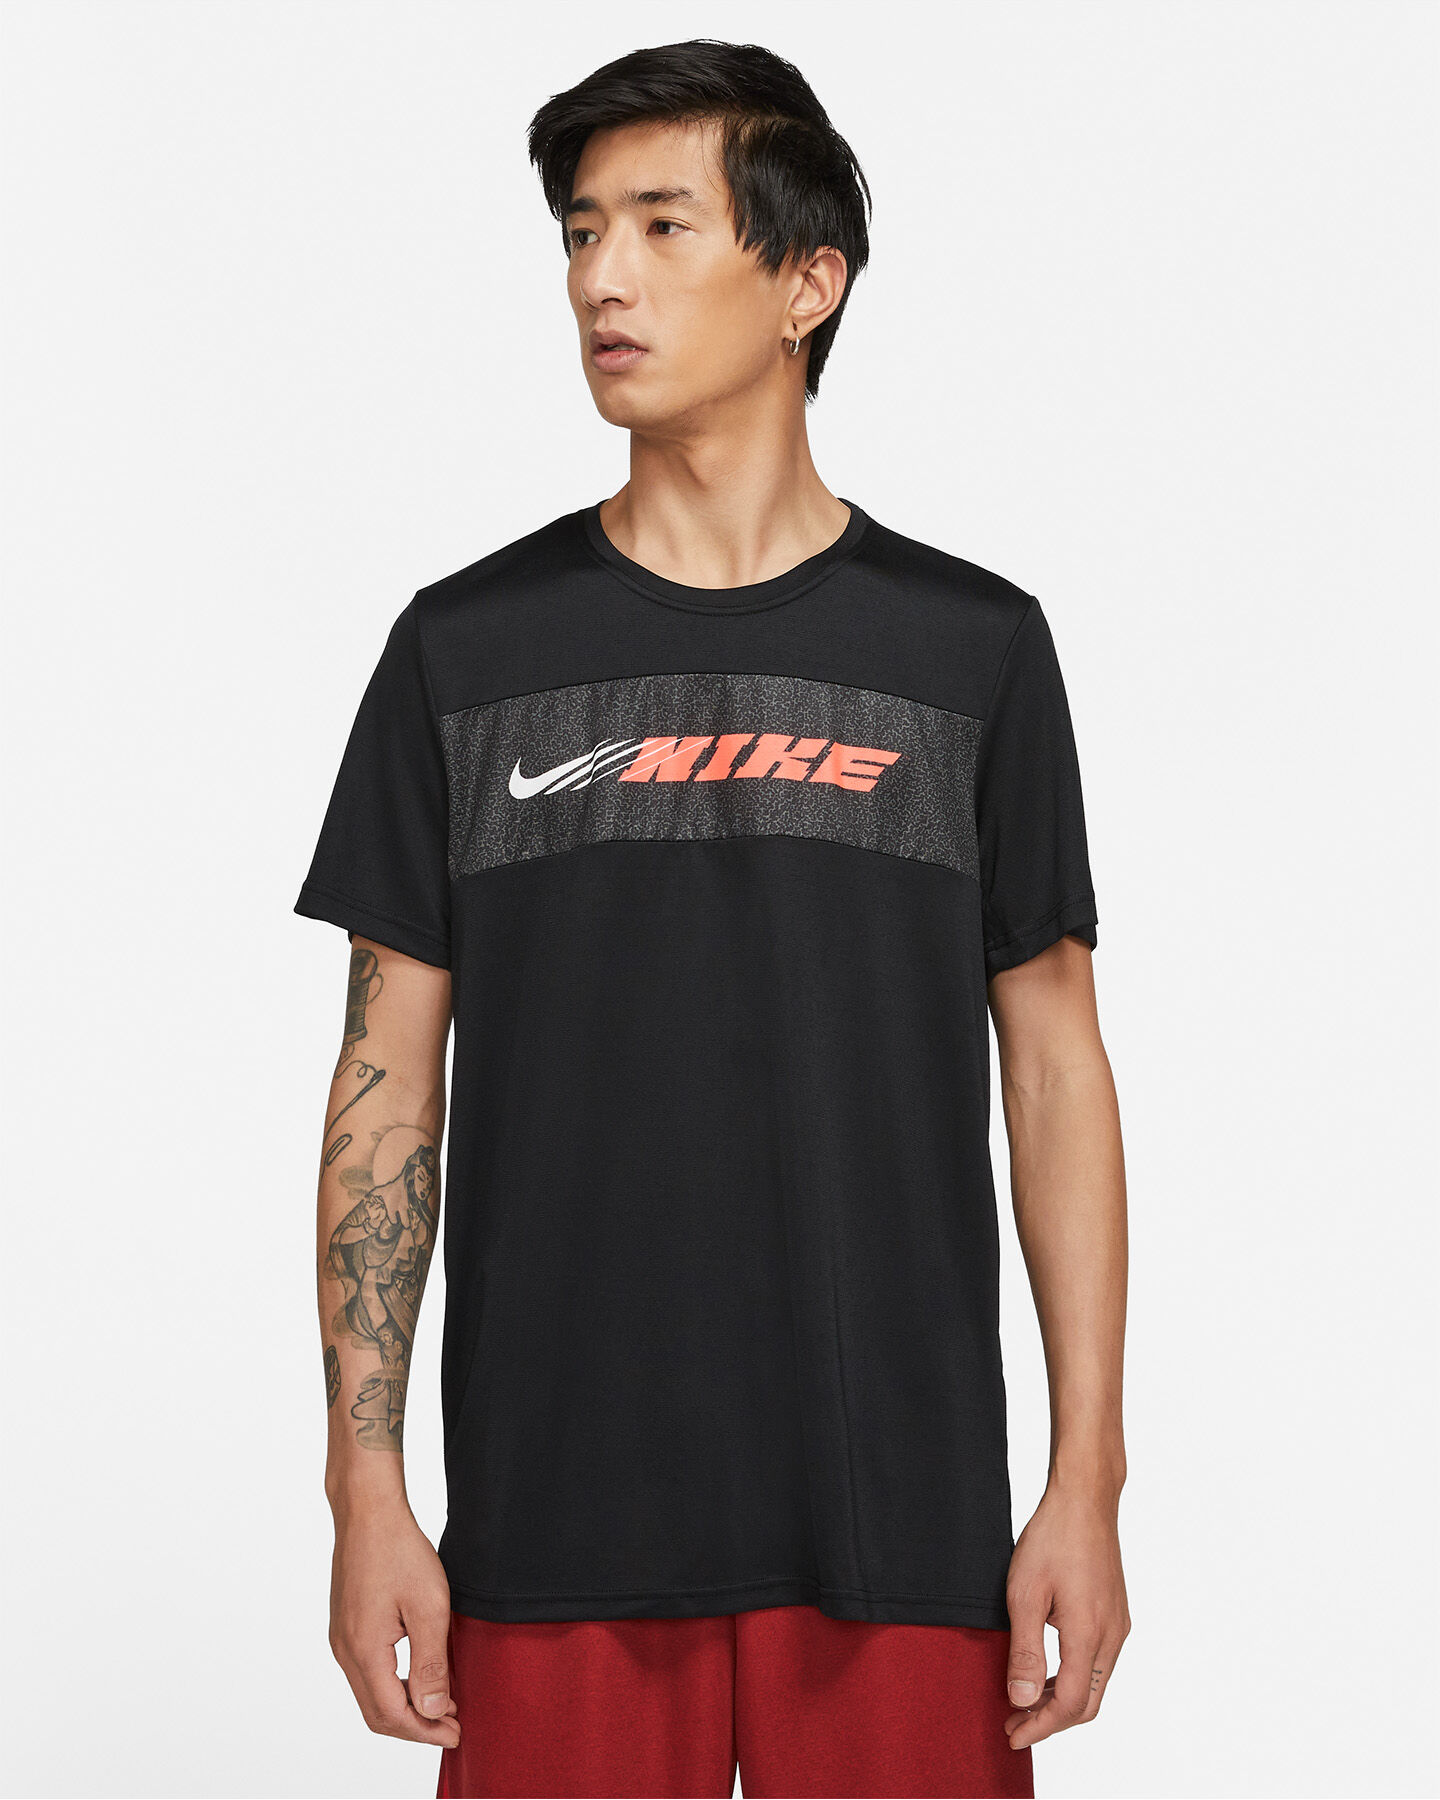  T-Shirt training NIKE DRY SUPERSET ENERGY M S5269658|010|S scatto 0